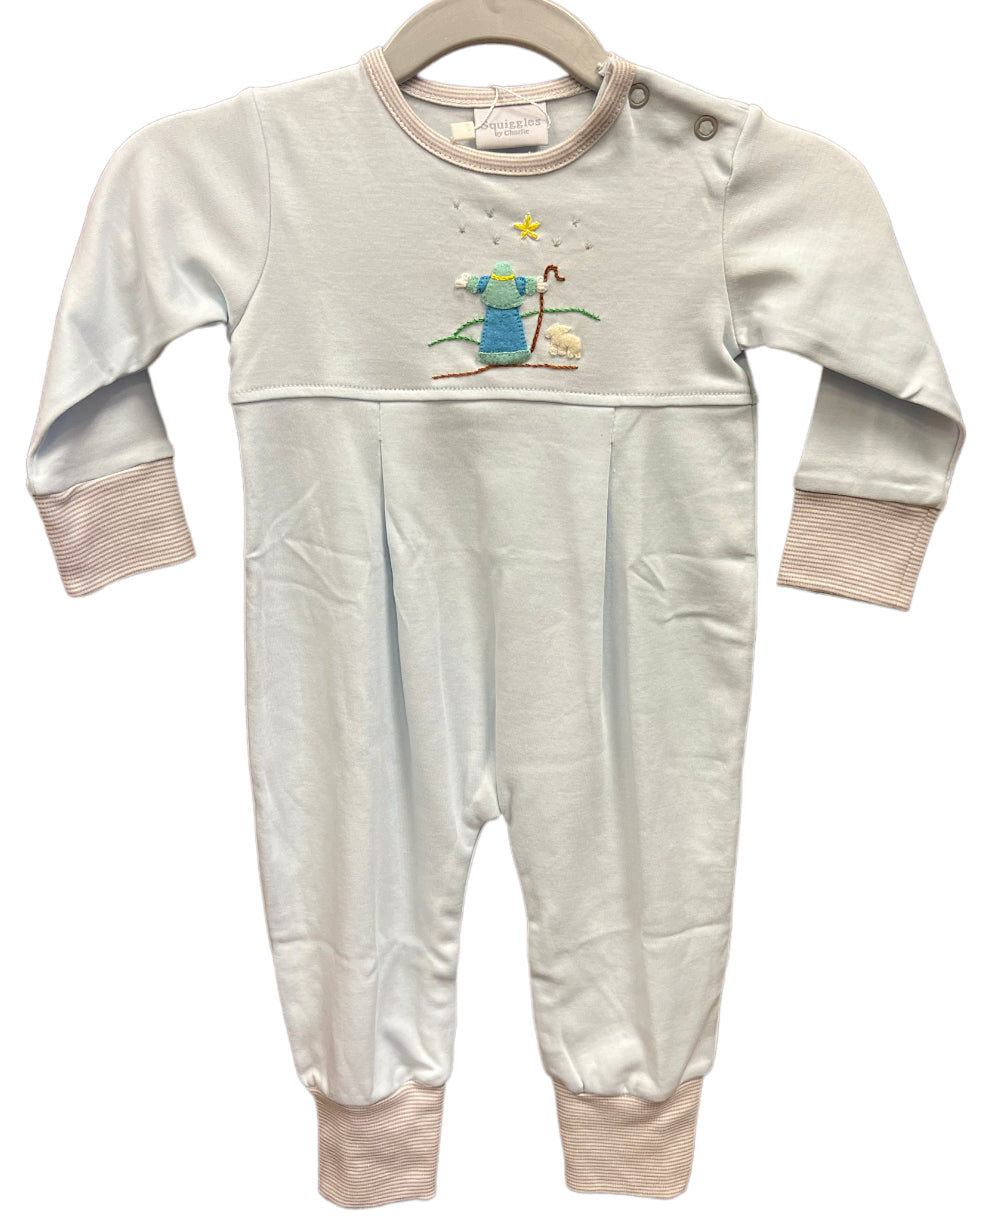 Sweet Nativity Romper by Squiggles